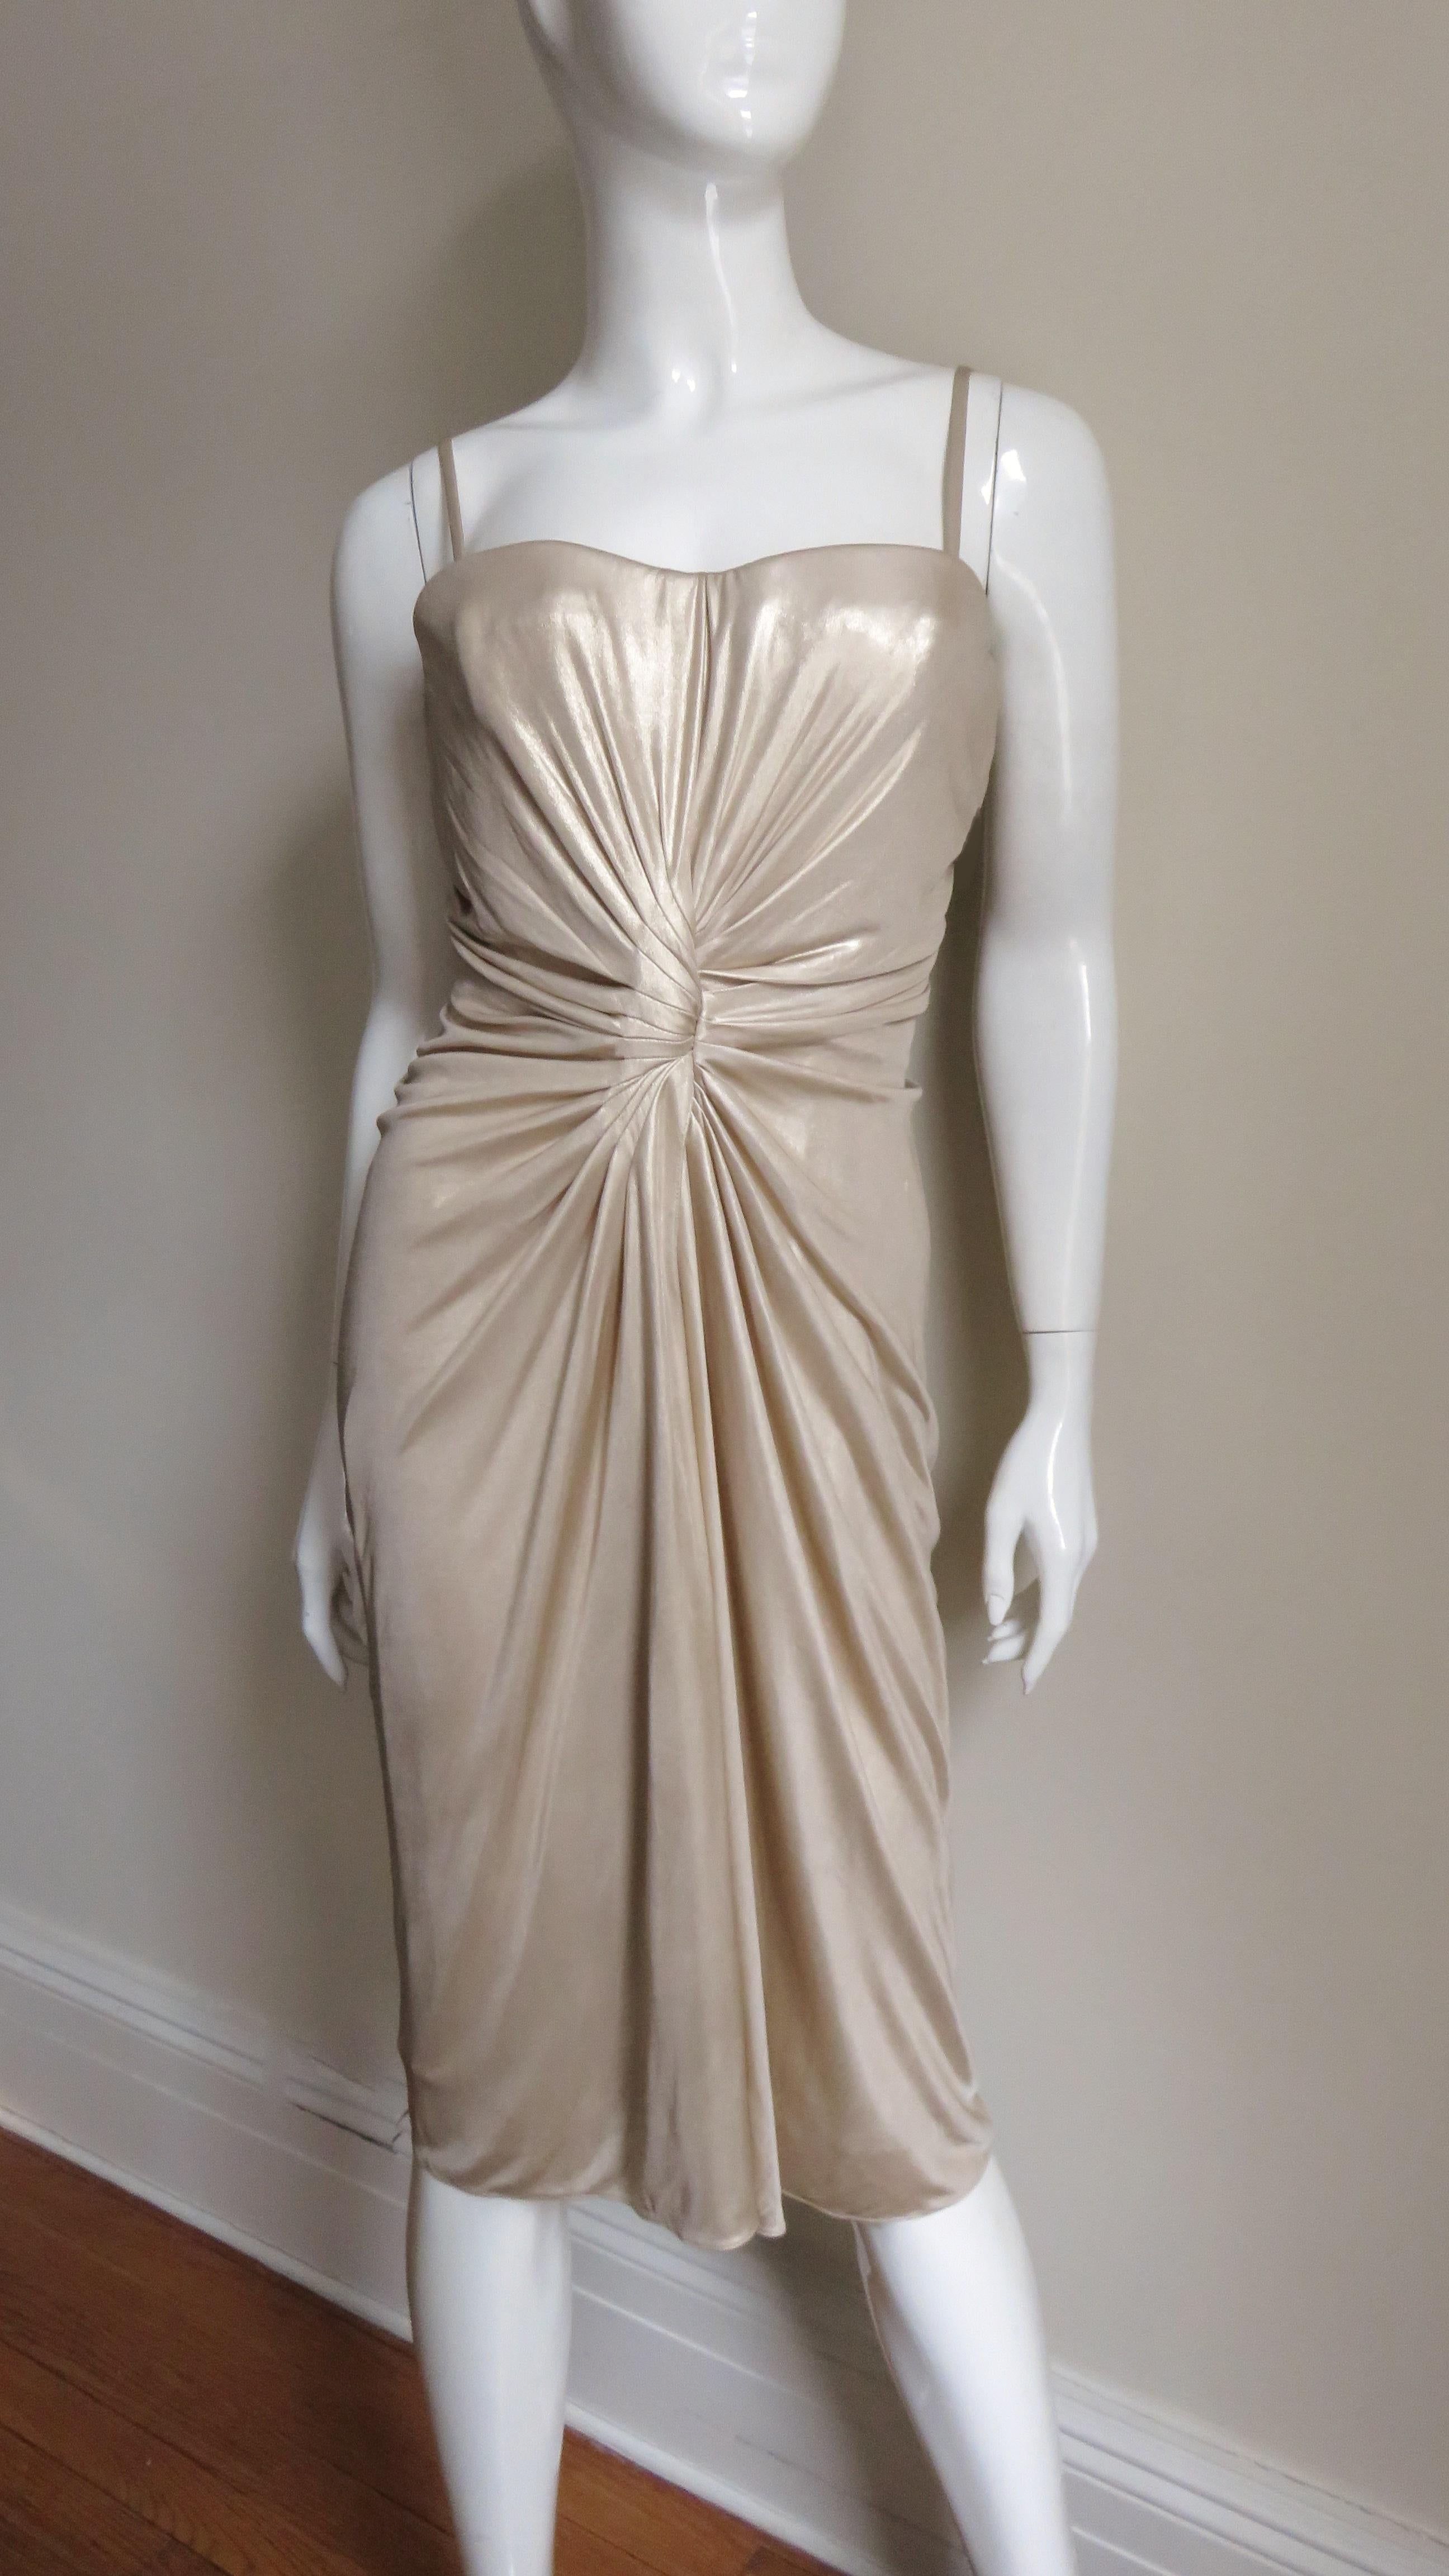 A gorgeous soft gold fine silk knit dress from Christian Dior. It has an inner boned corset with underwire bust cups, and detachable spaghetti straps enabling the dress to also be worn strapless. Very flattering with an array of seaming and ruching